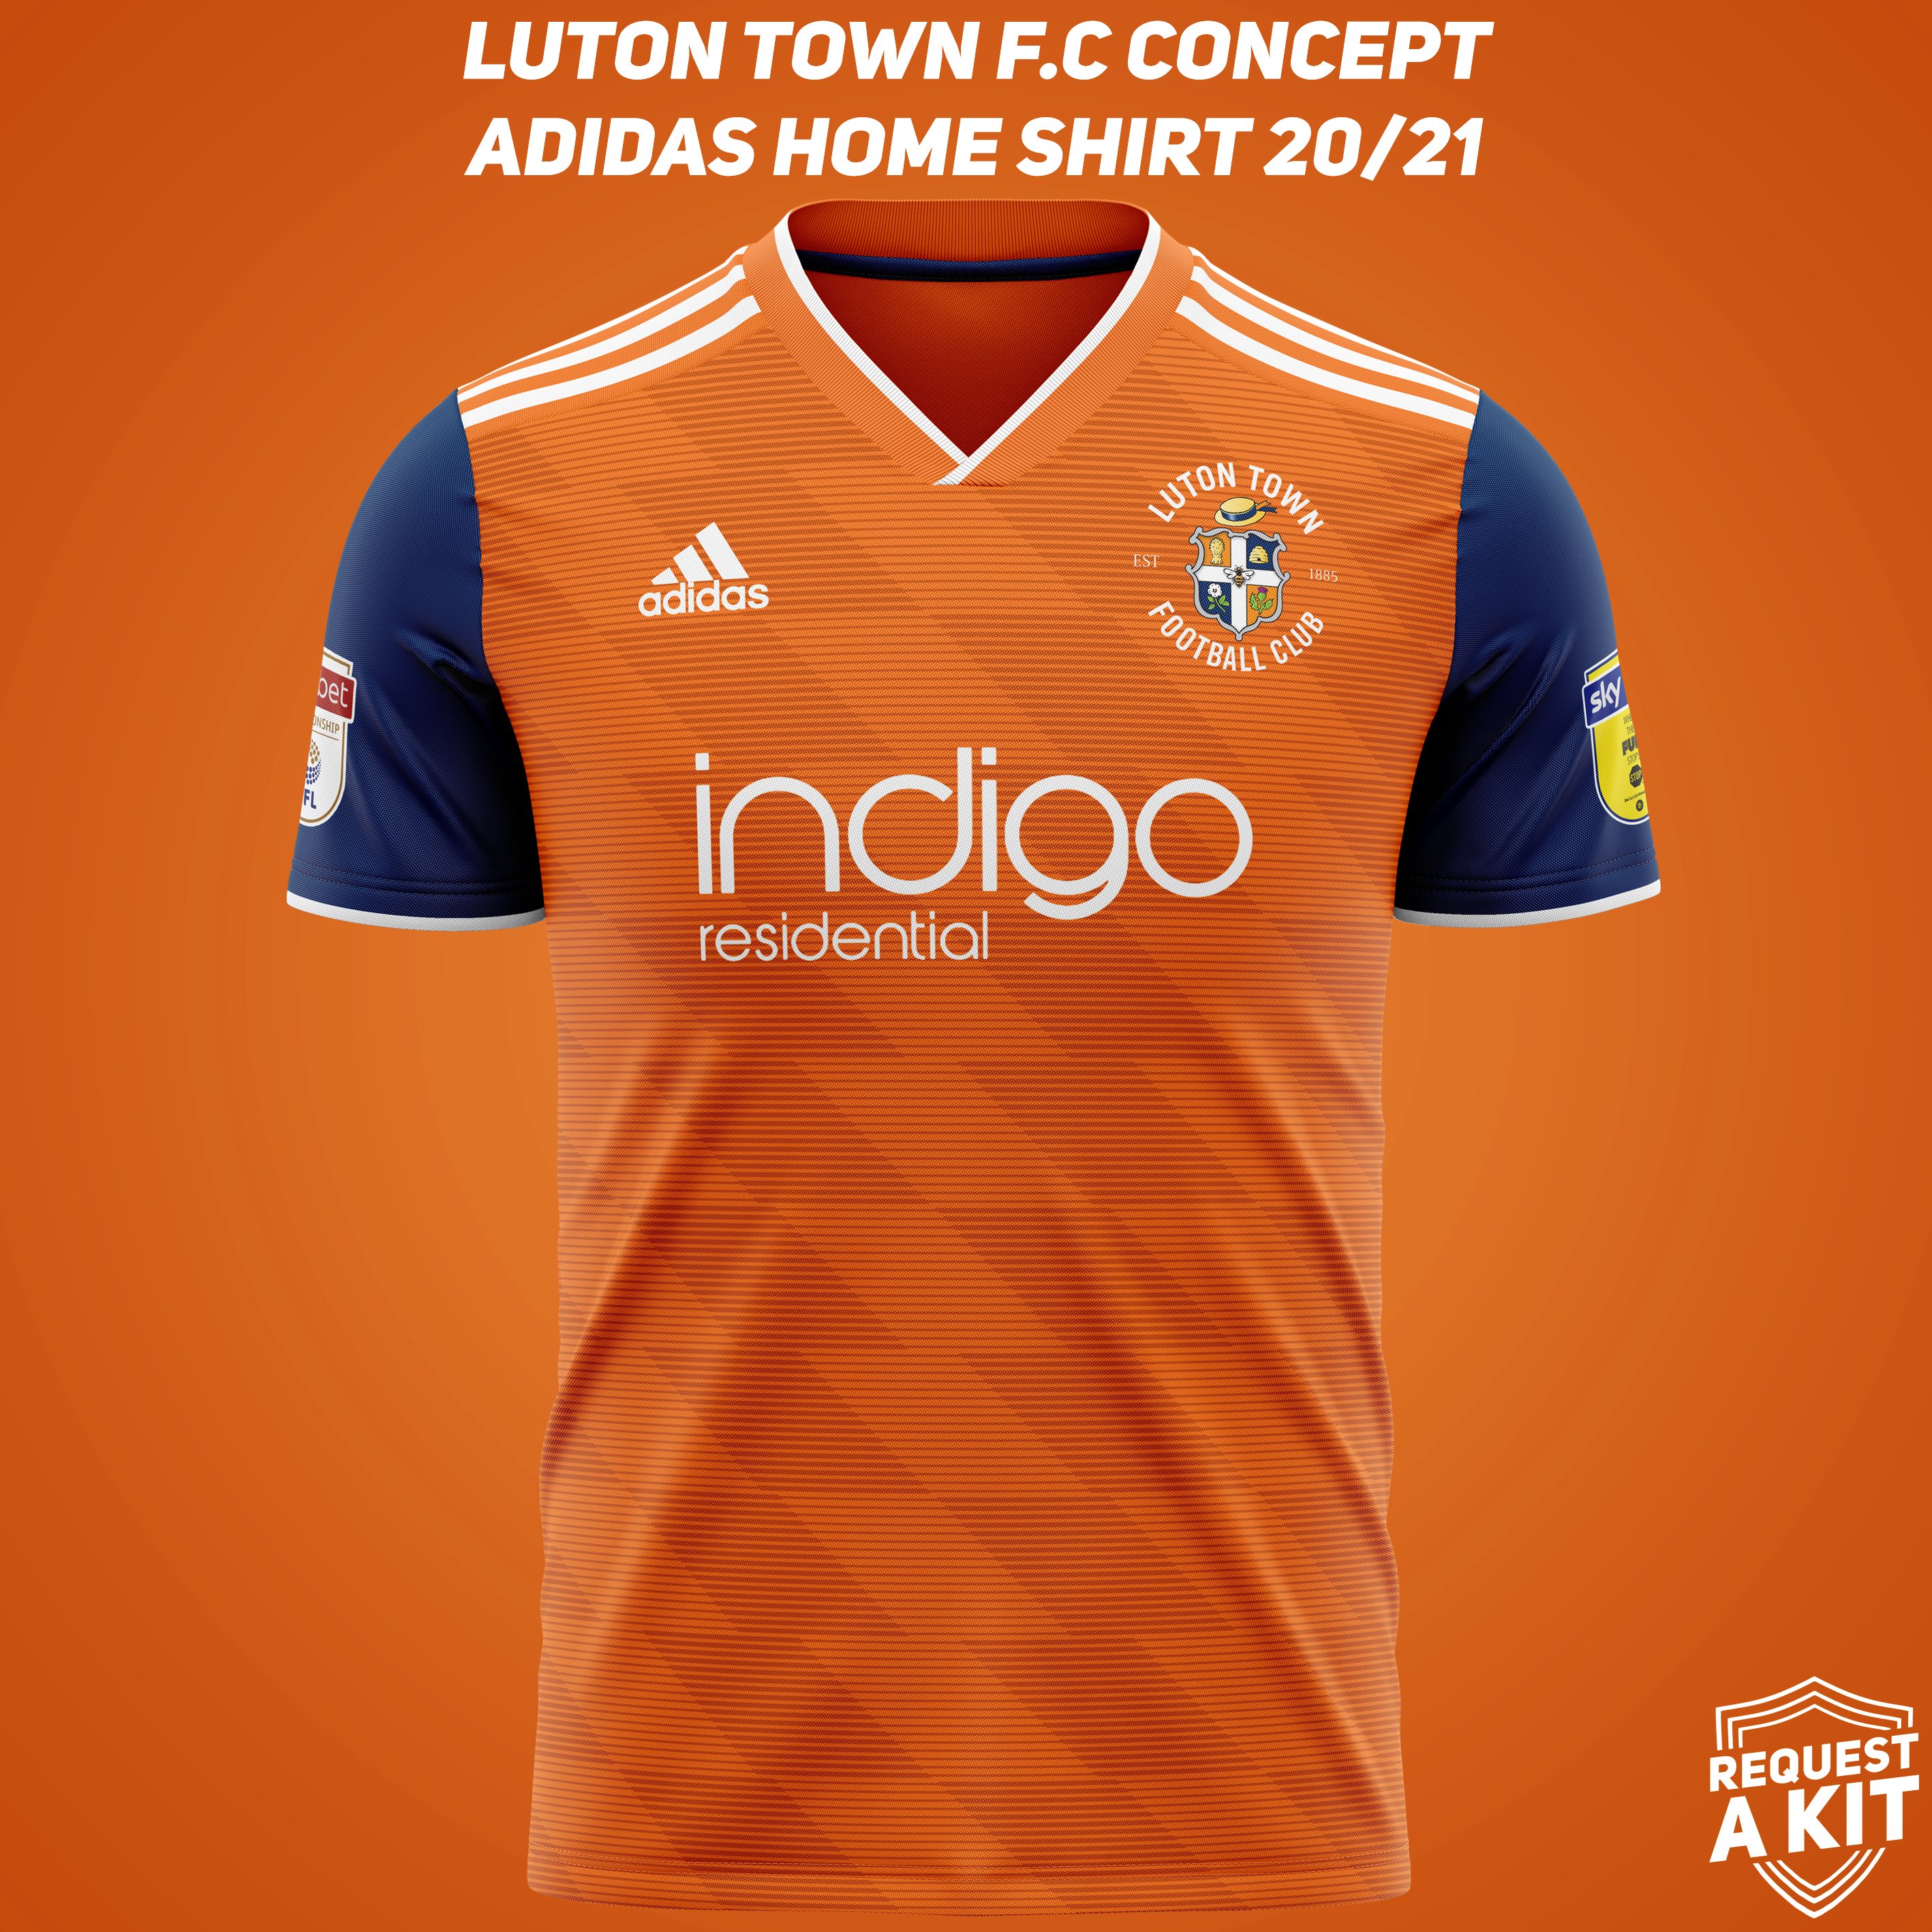 regeling Algebra Brutaal Request A Kit on Twitter: "Luton Town F.C Concept Adidas Home, Away and  Third Shirts 2020/21 (requested by @thelewisbarlow) #Luton #LTFC #Hatters  #COYH #WALT #FM19 #wearethecommunity Download for your Football Manager save